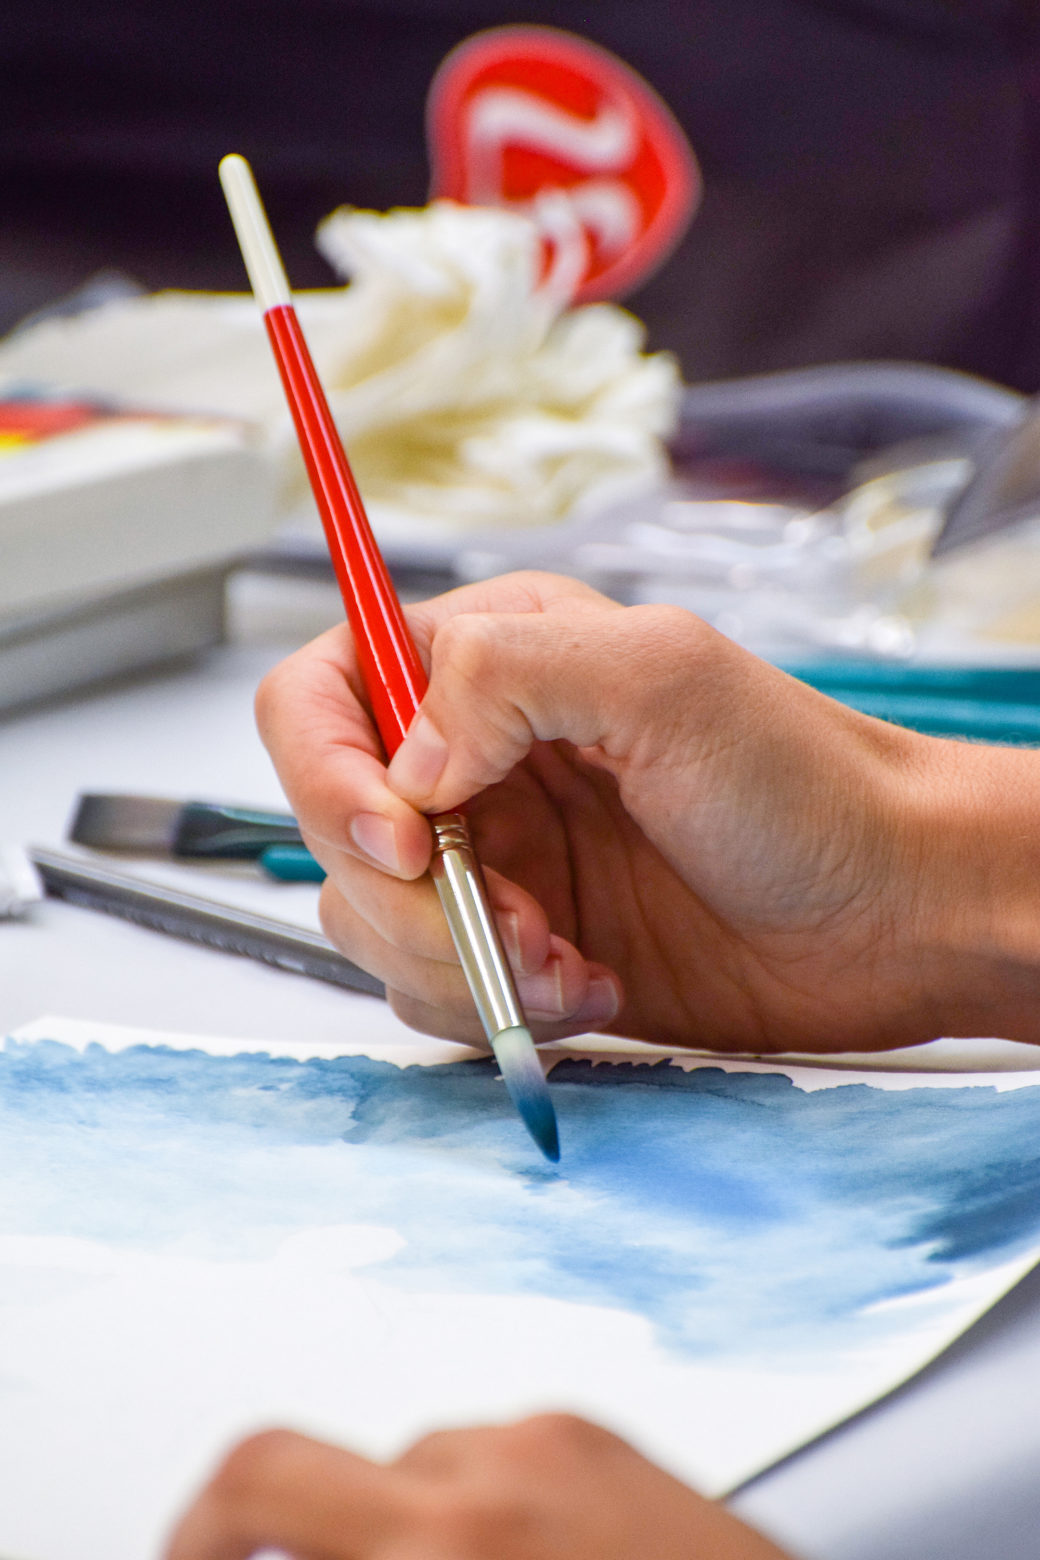 Image of a slender hand holding a paintbrush stroking a page with blue watercolors